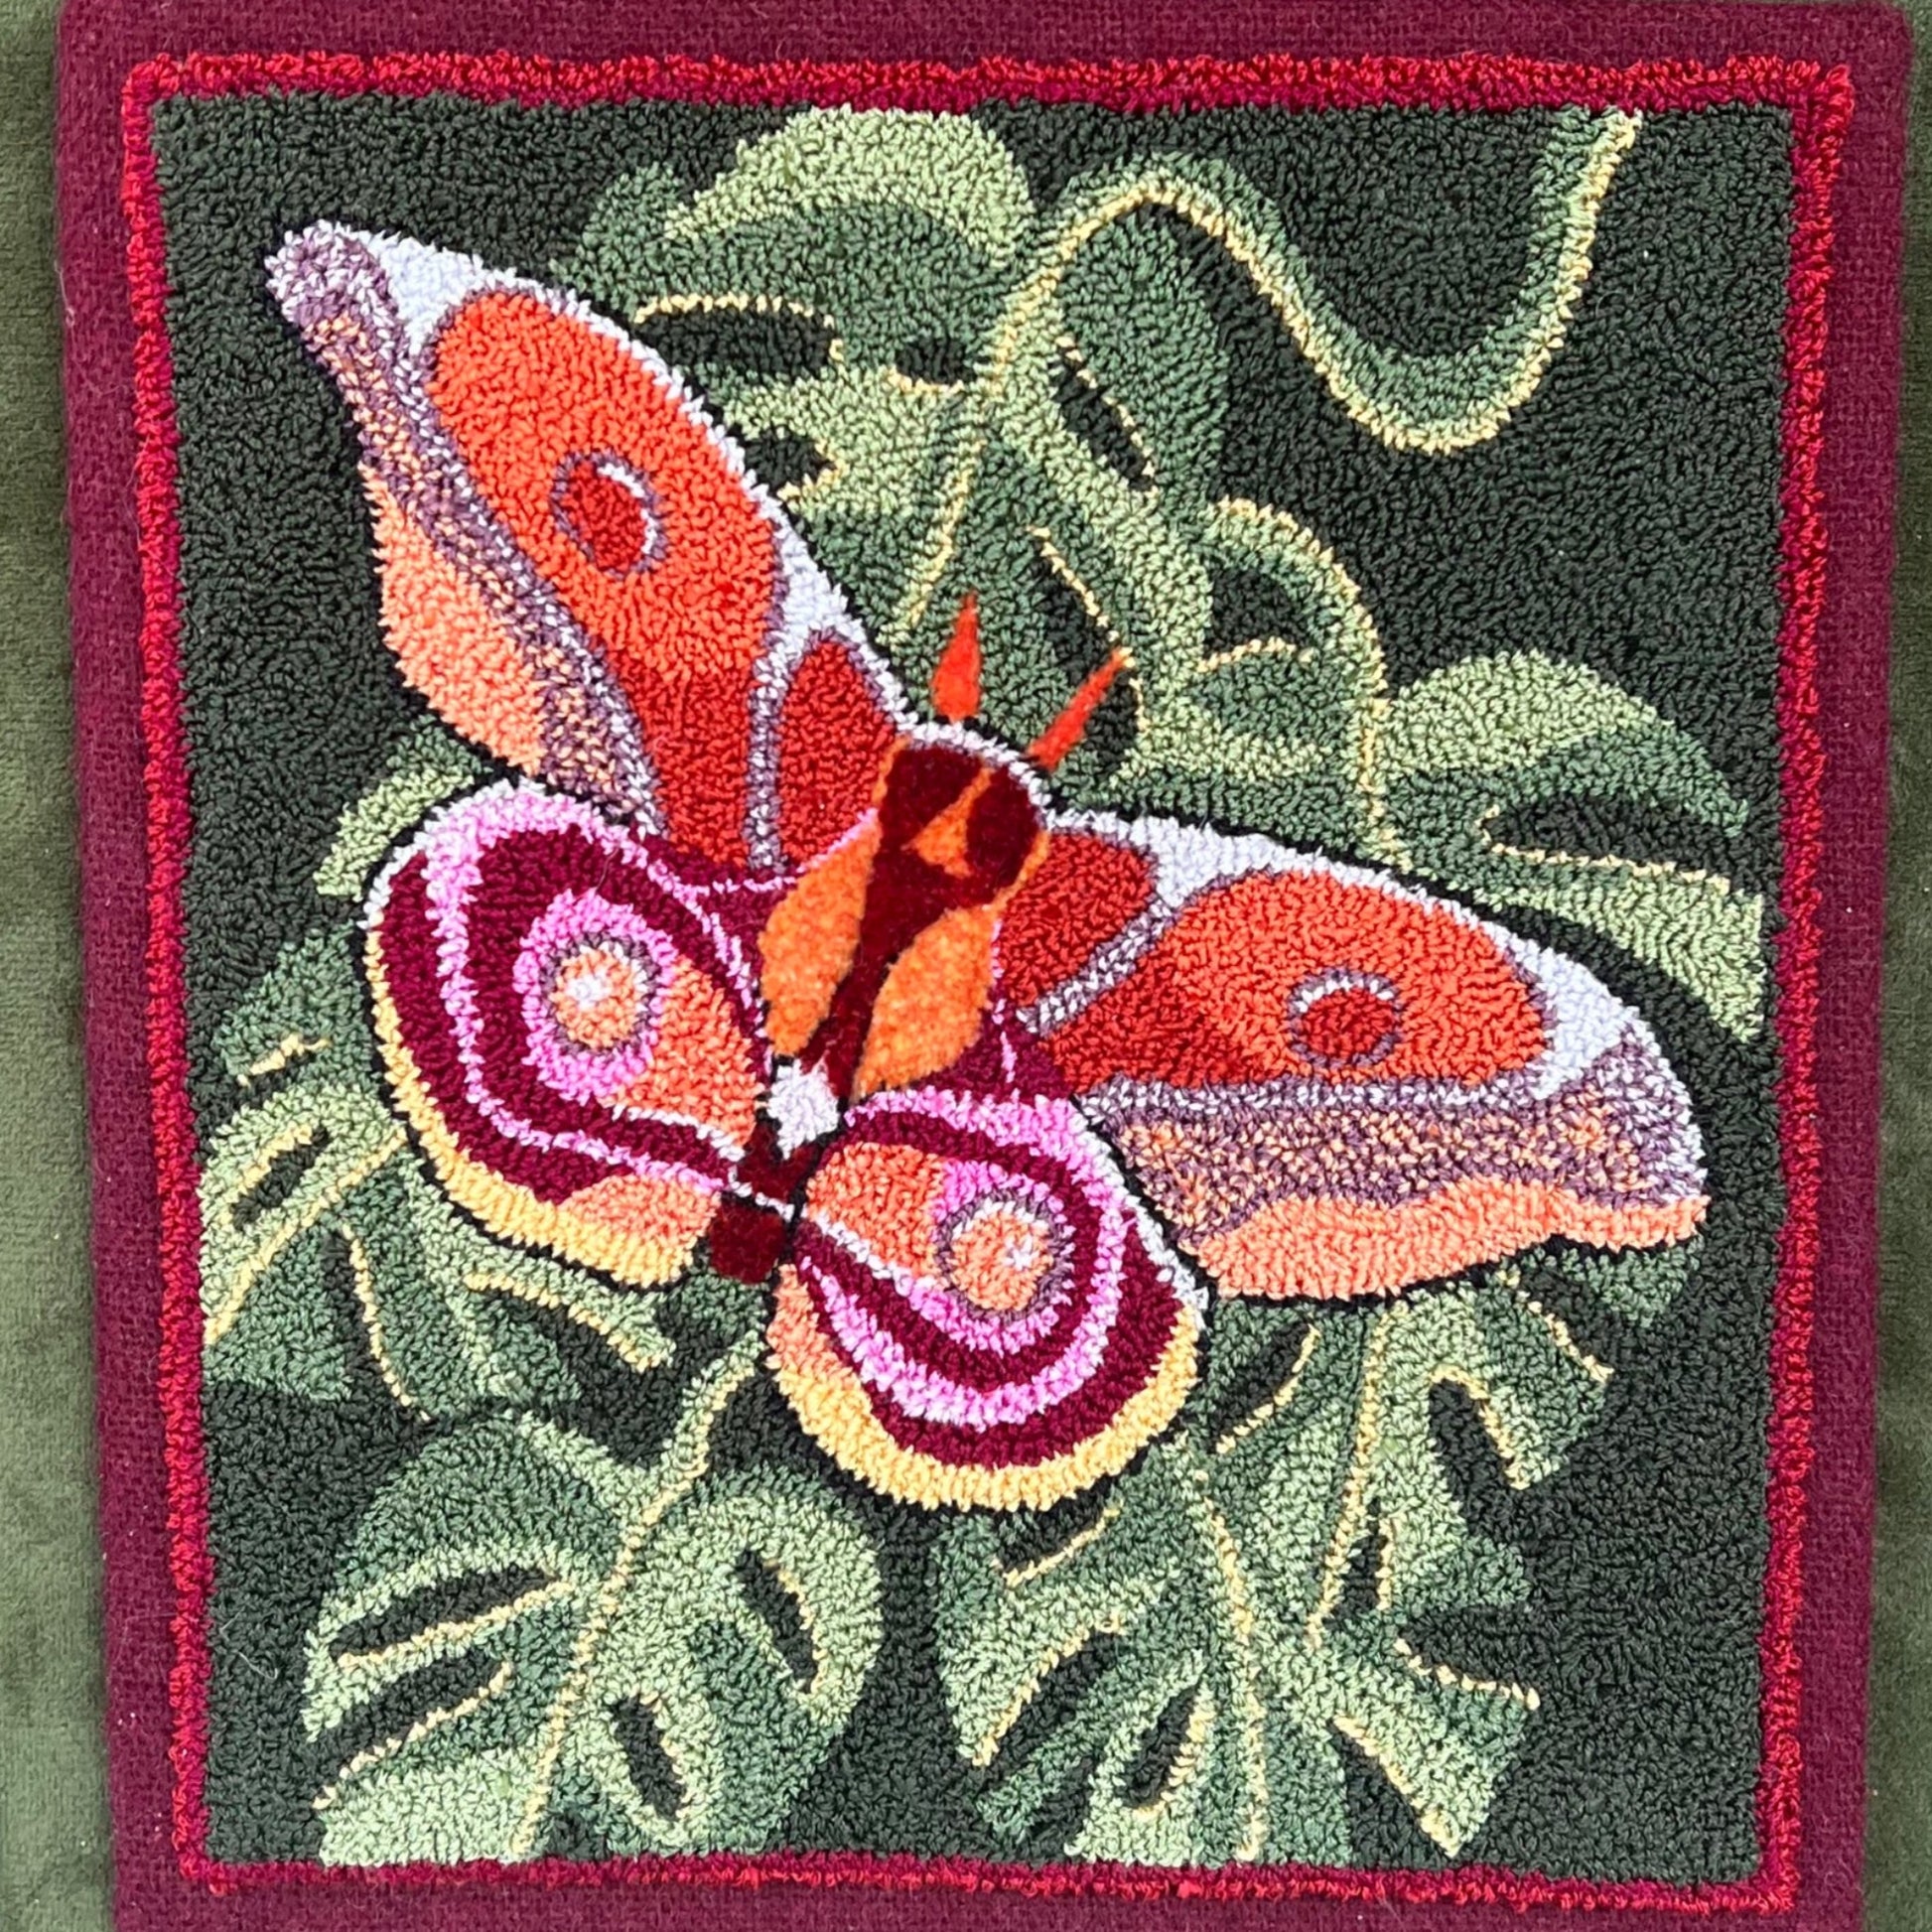 Bullseye Moth Paper Rug Hooking Pattern by Orphaned Wool, copyright © 2023 Kelly Kanyok. This pattern design is of a beautiful Bullseye Moth on top of a collection of leaves. Enjoy the stunning color inspired by nature herself.